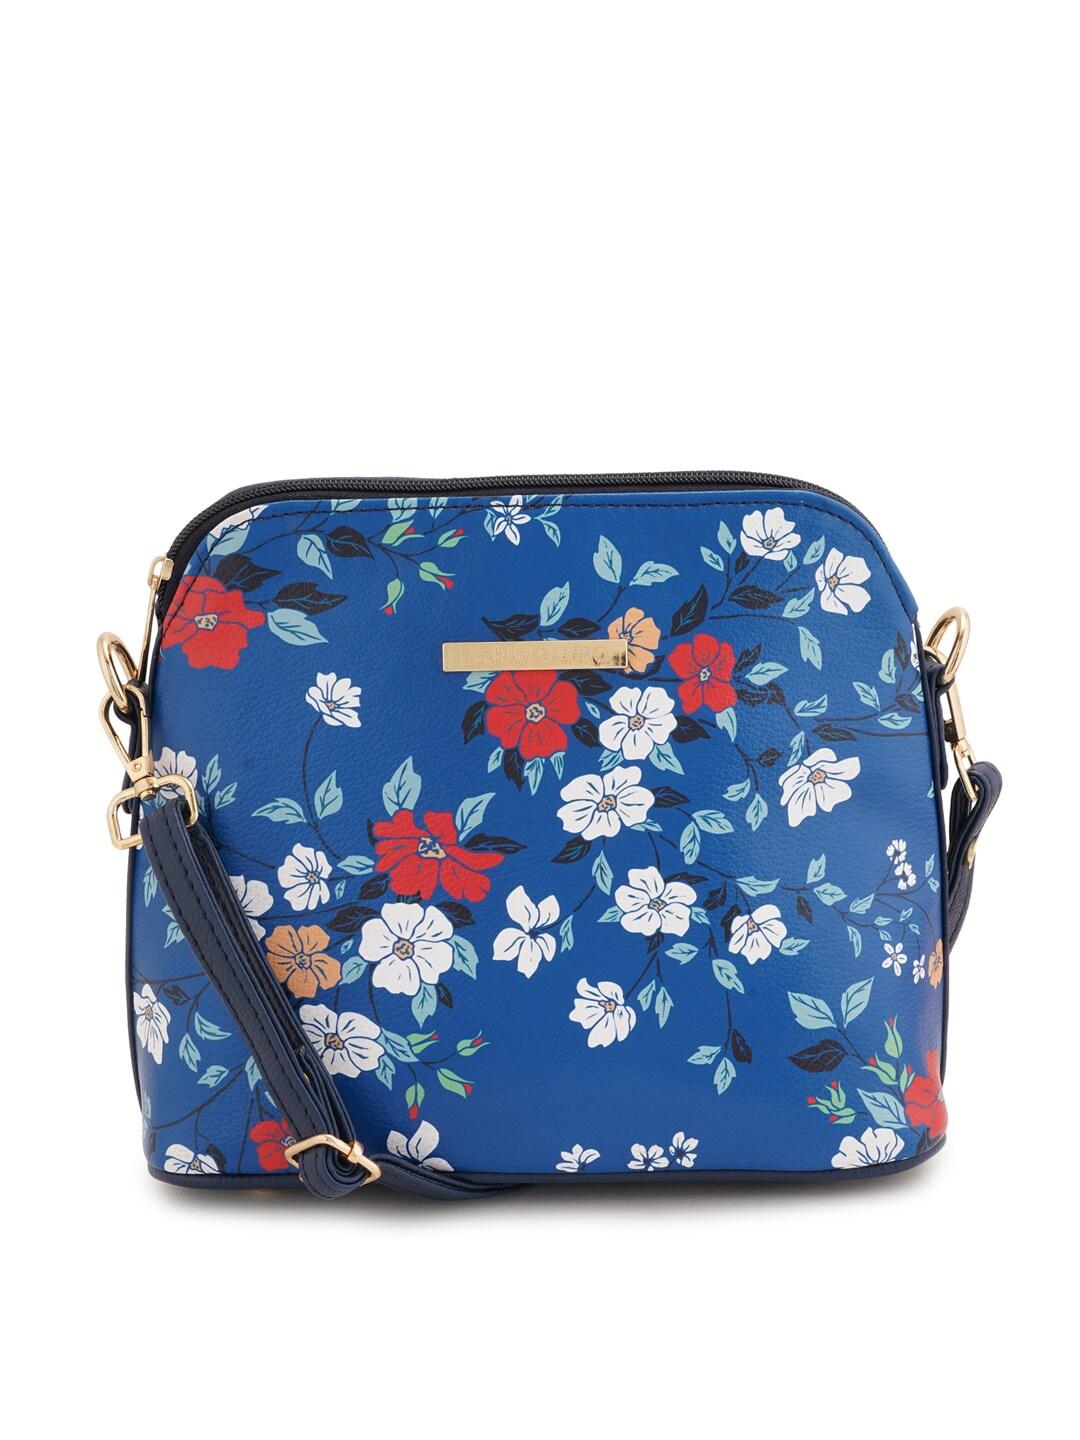 Lapis O Lupo Floral Printed Structured Sling Bag